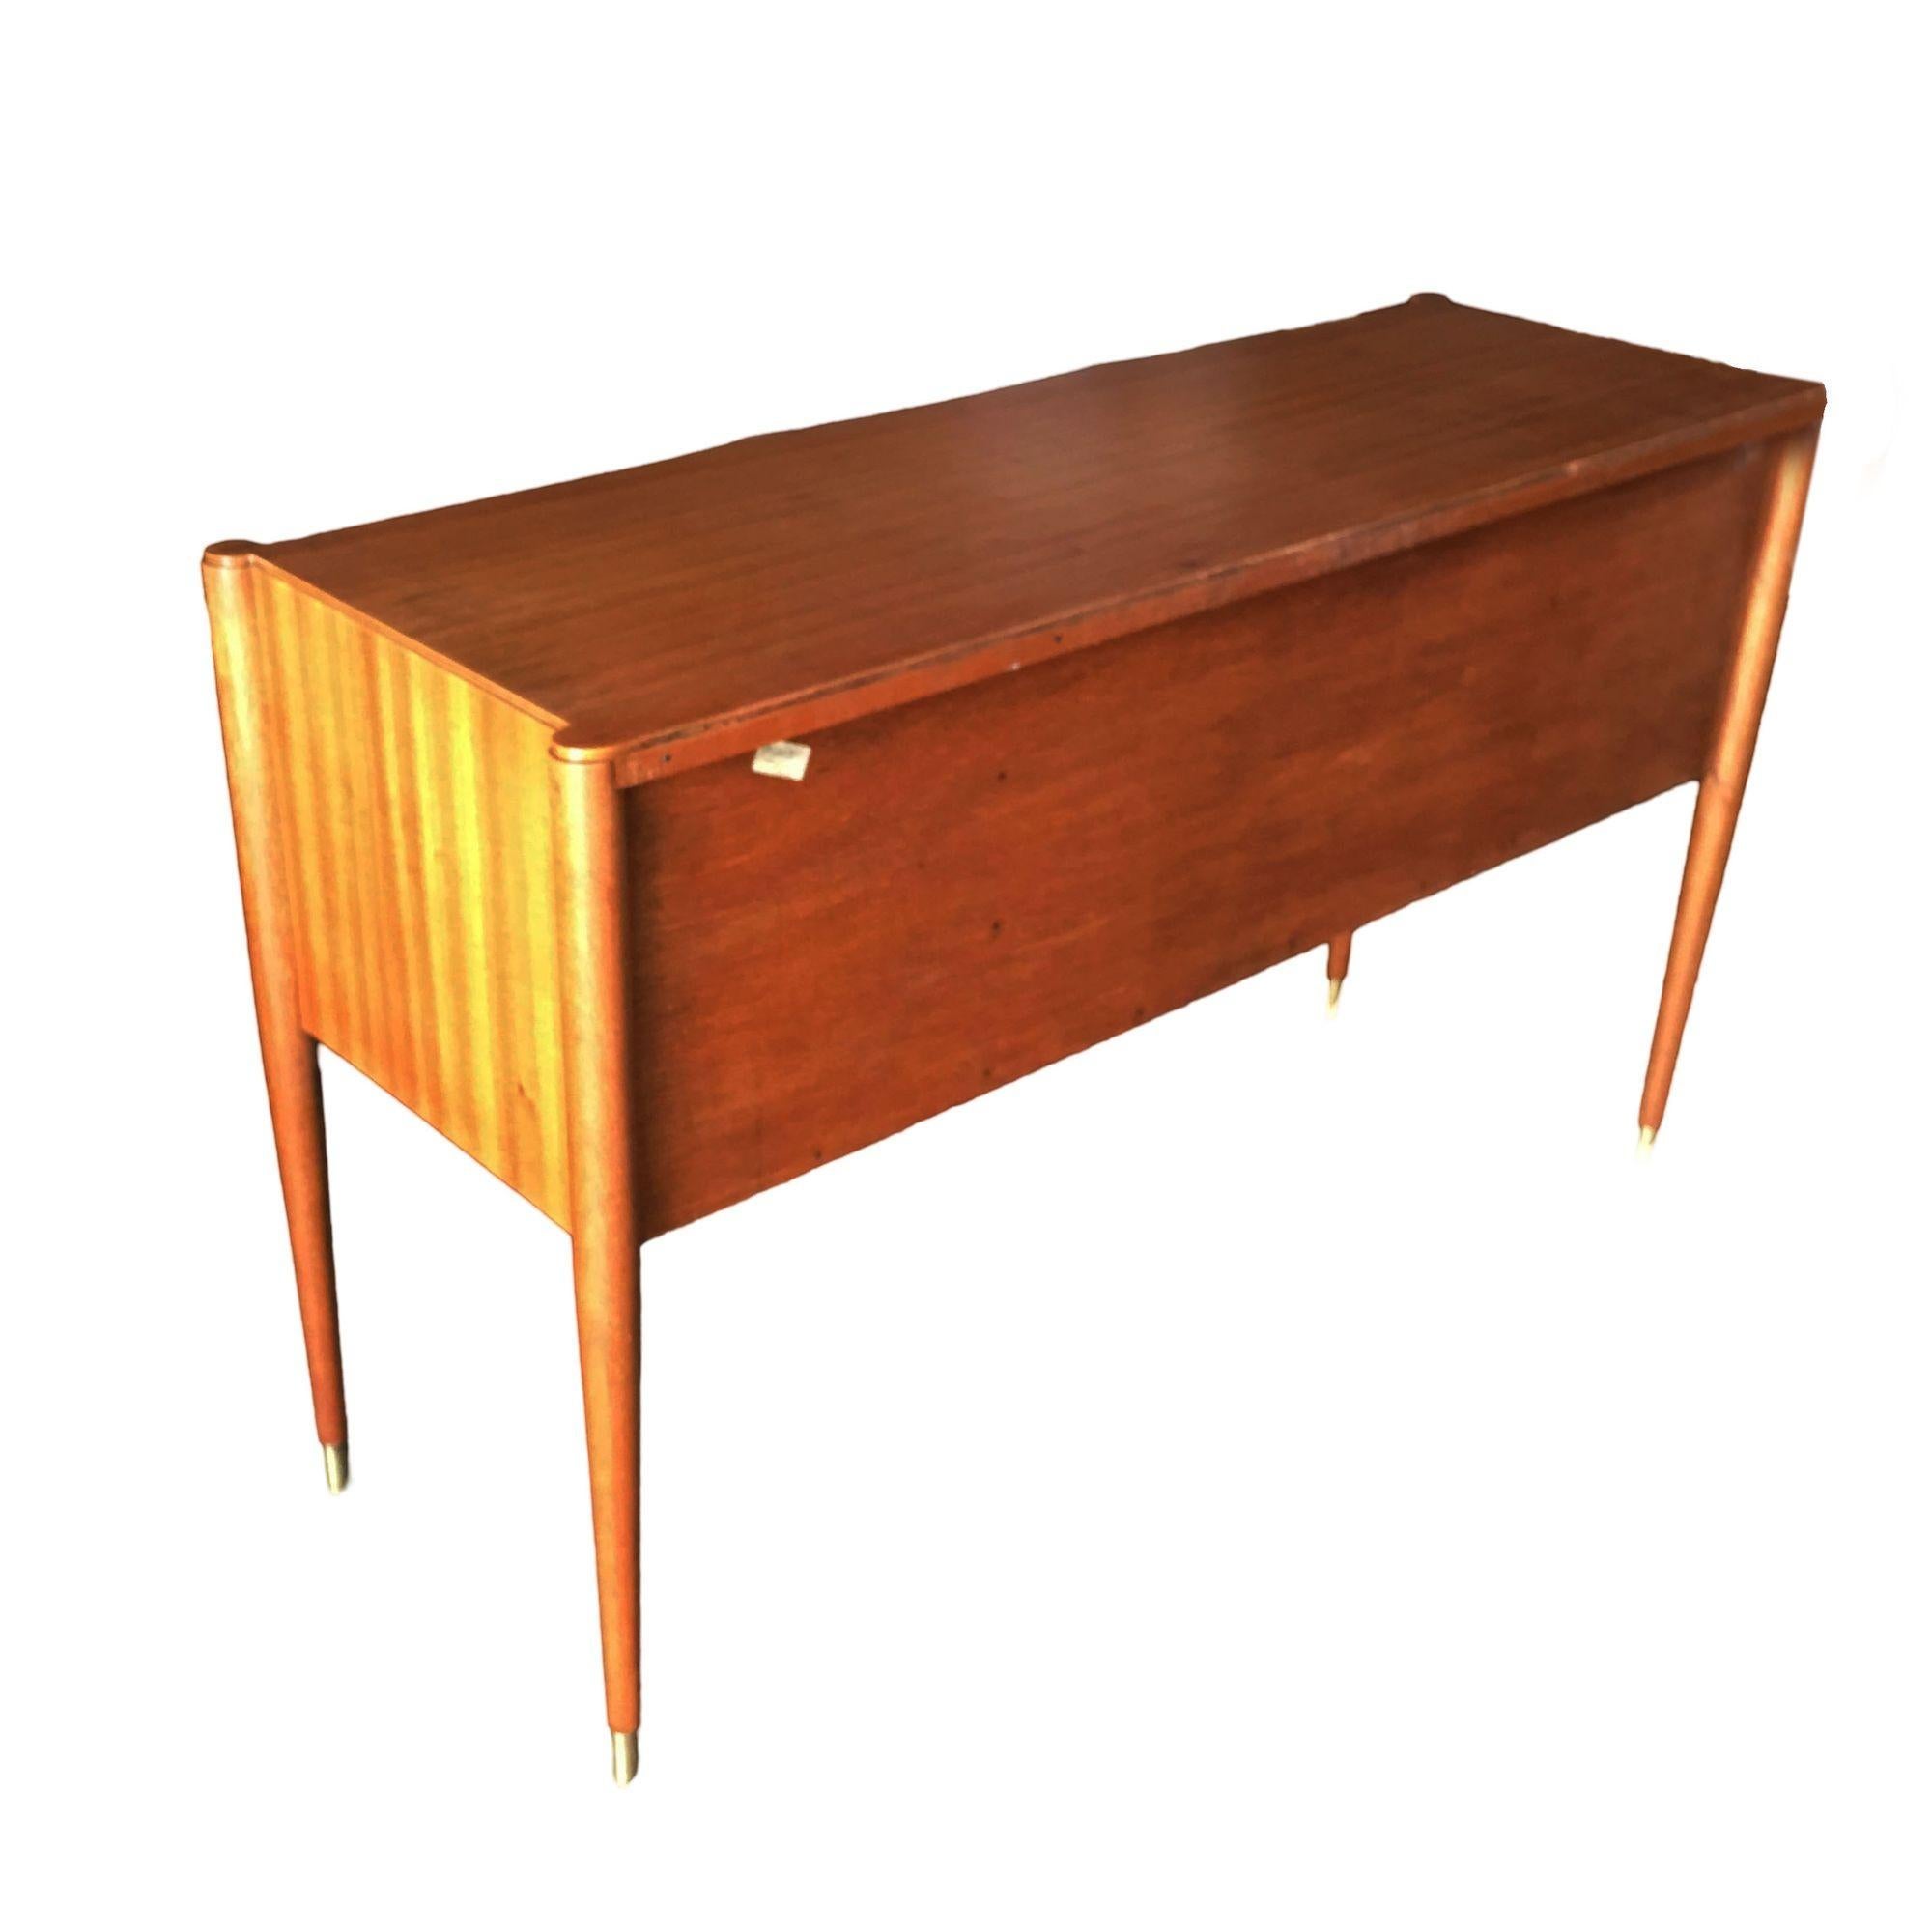 American High Style Midcentury Mahogany Sideboard by Paul Frankl For Sale